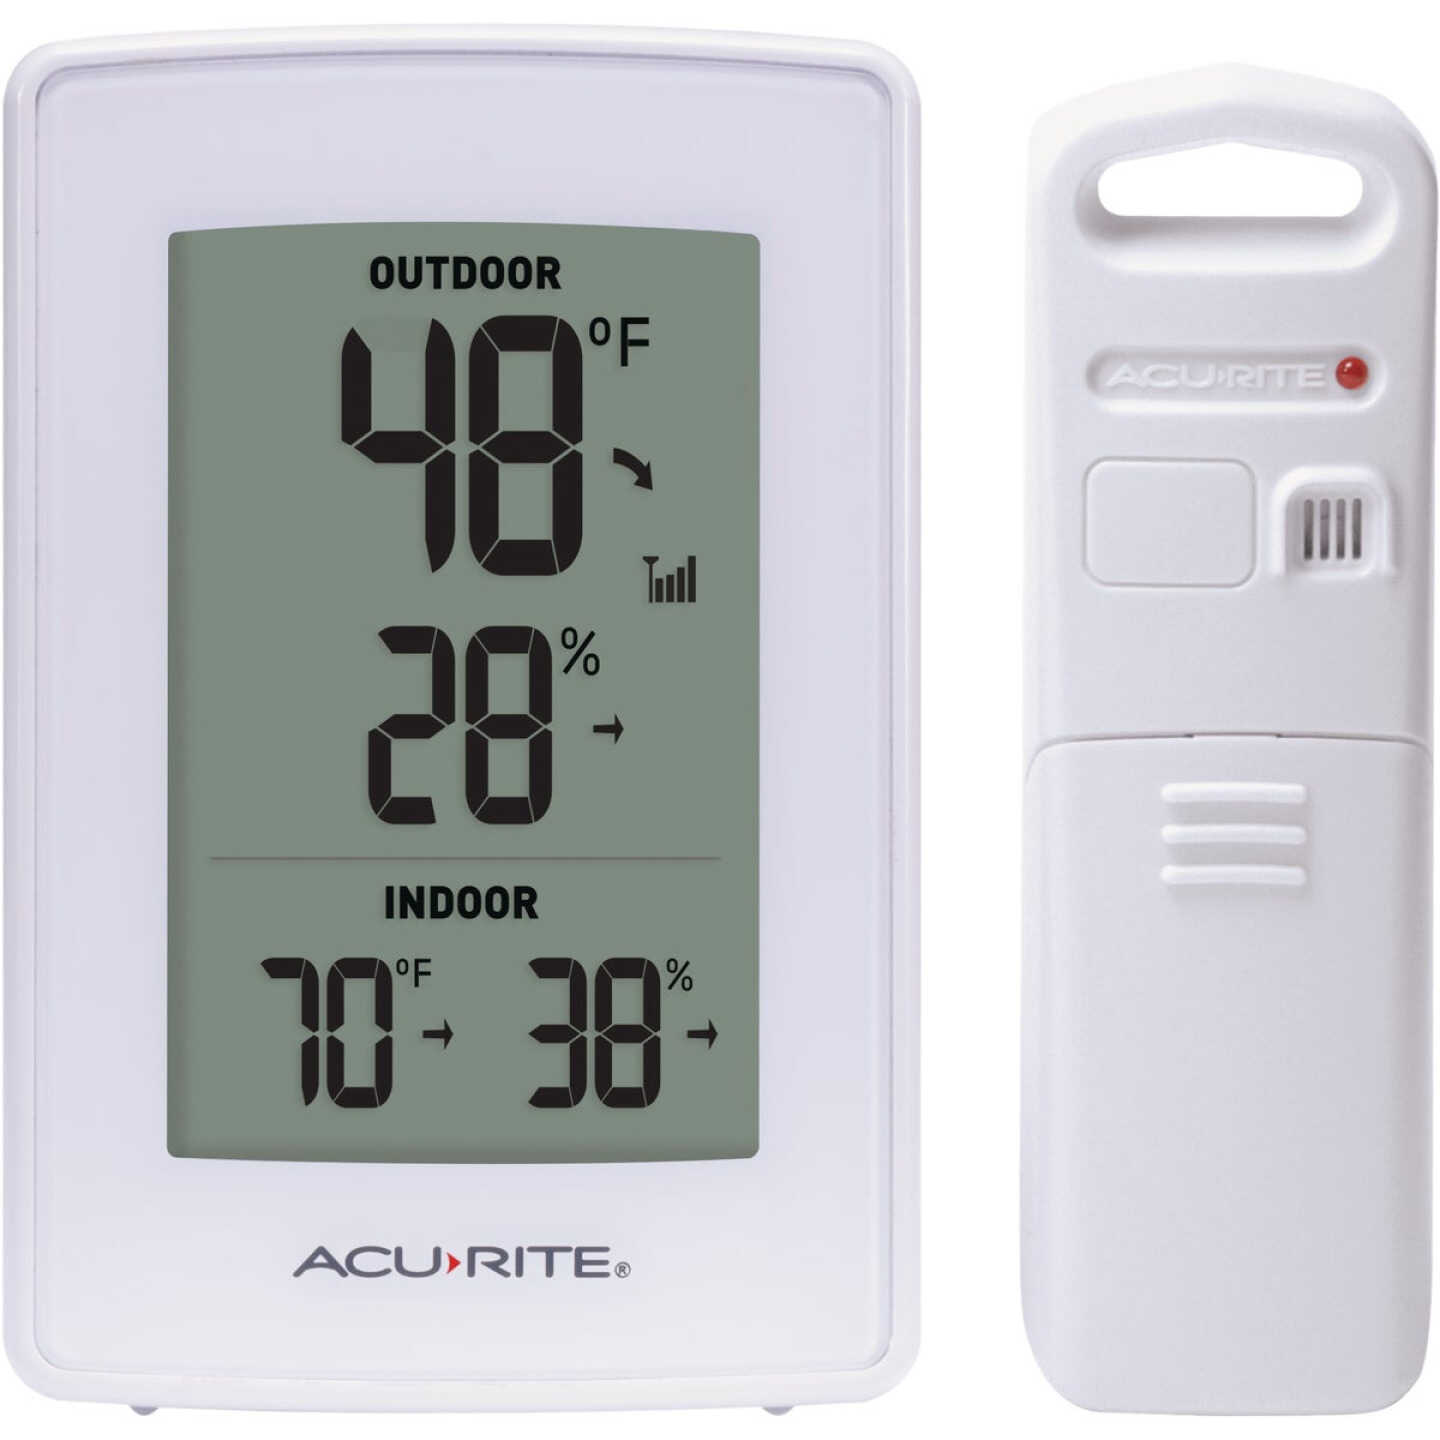 AcuRite Digital Cooking Thermometers